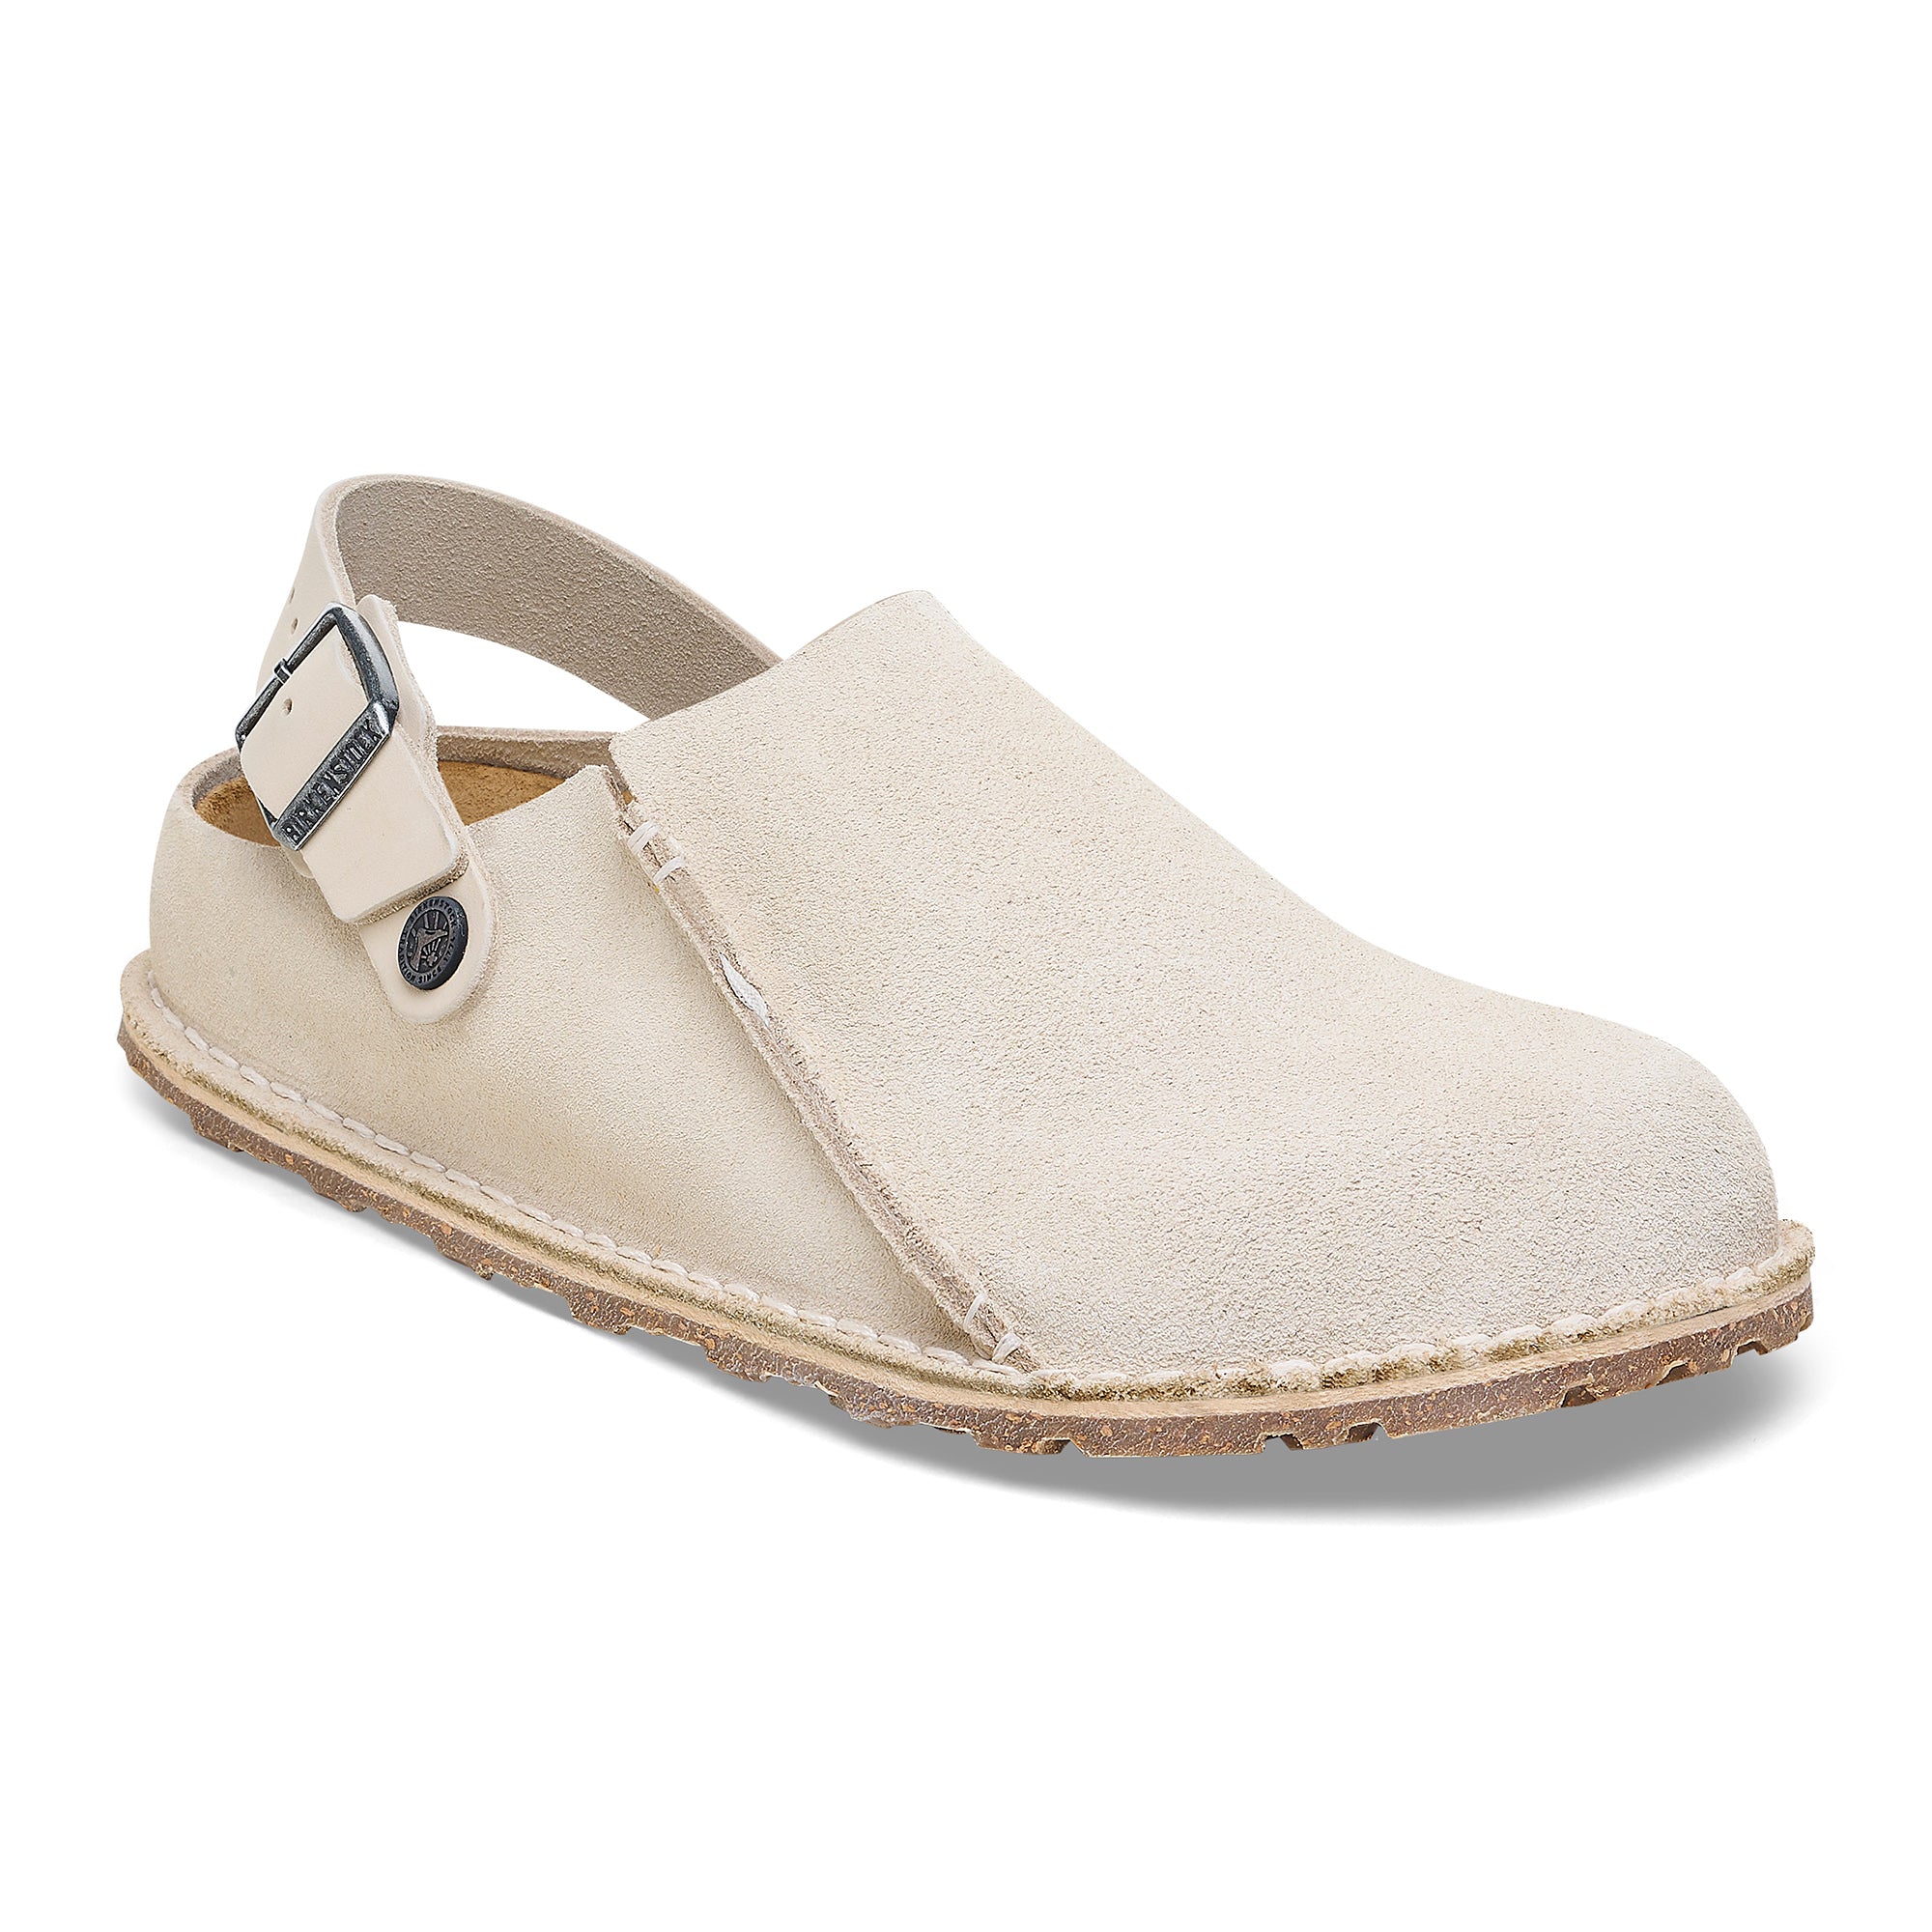 Birkenstock Limited Edition Lutry eggshell suede